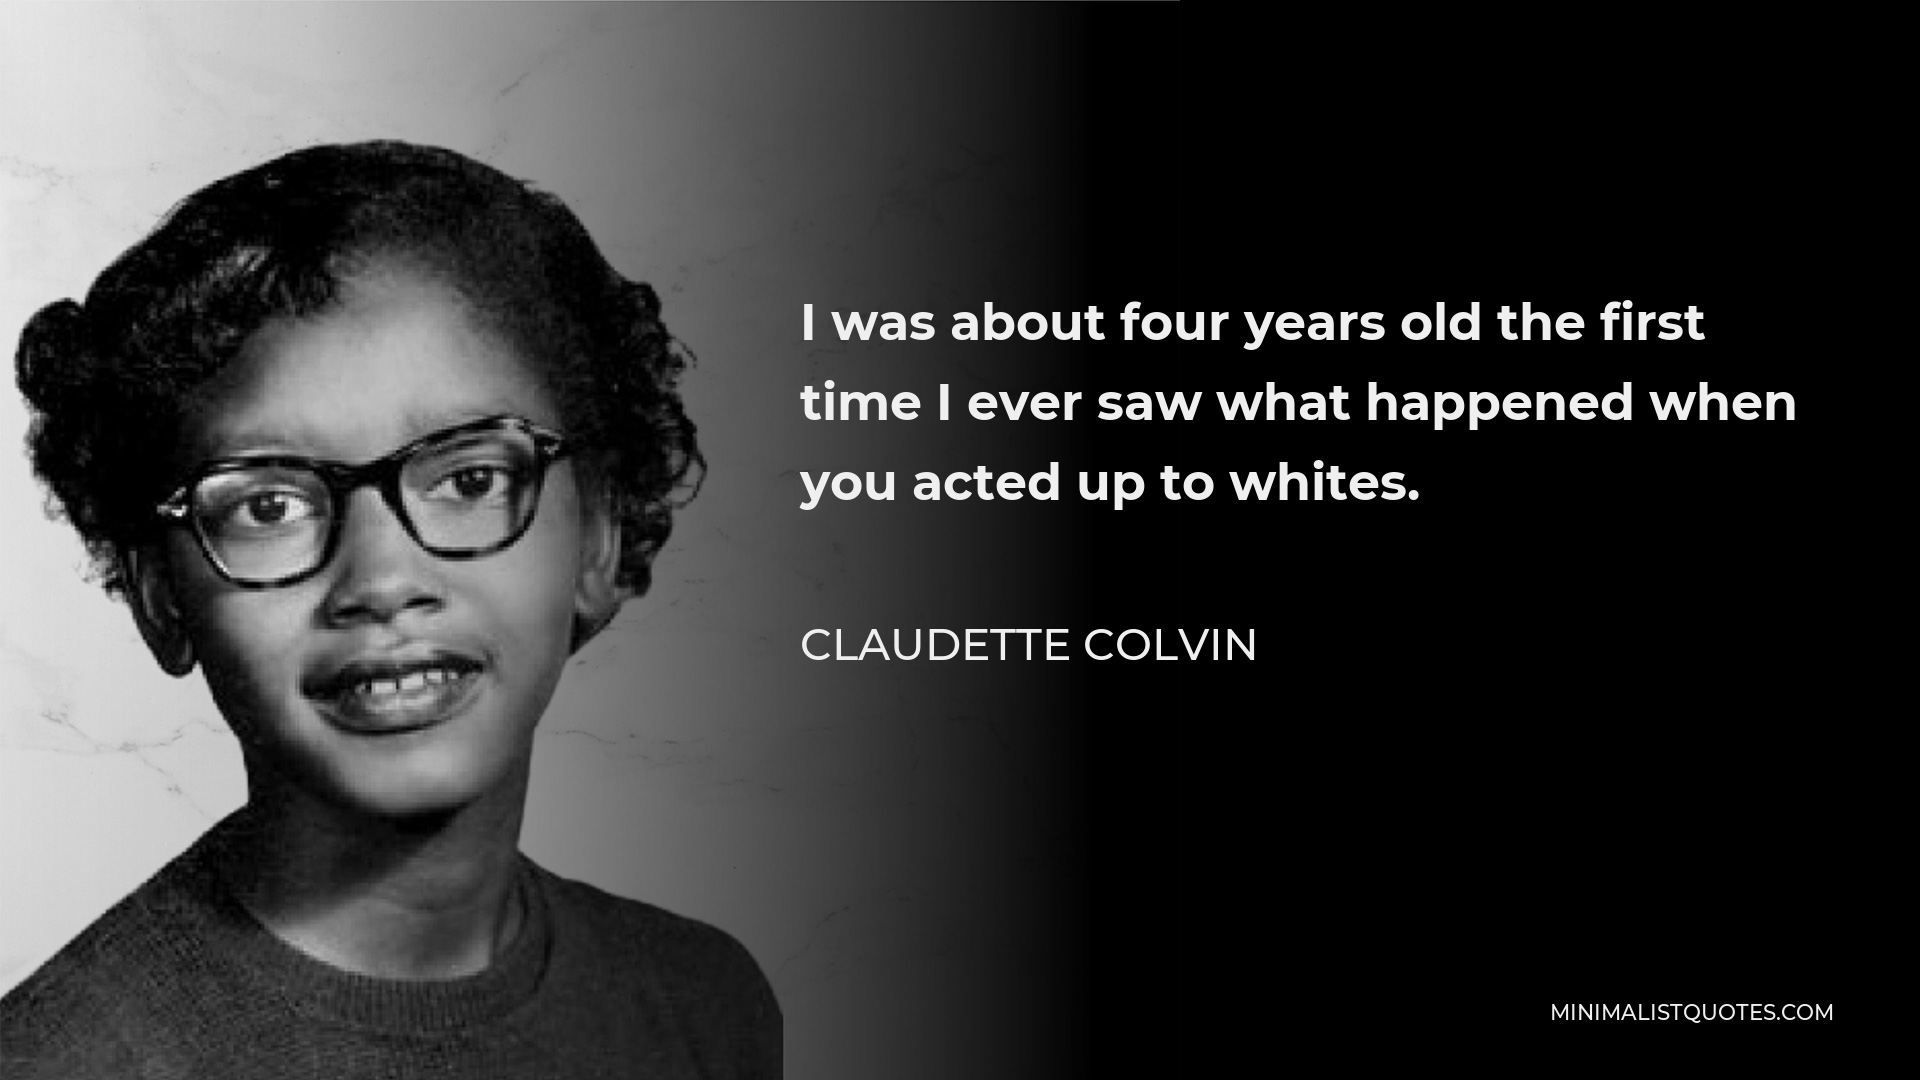 Claudette Colvin Quote - I was about four years old the first time I ever saw what happened when you acted up to whites.